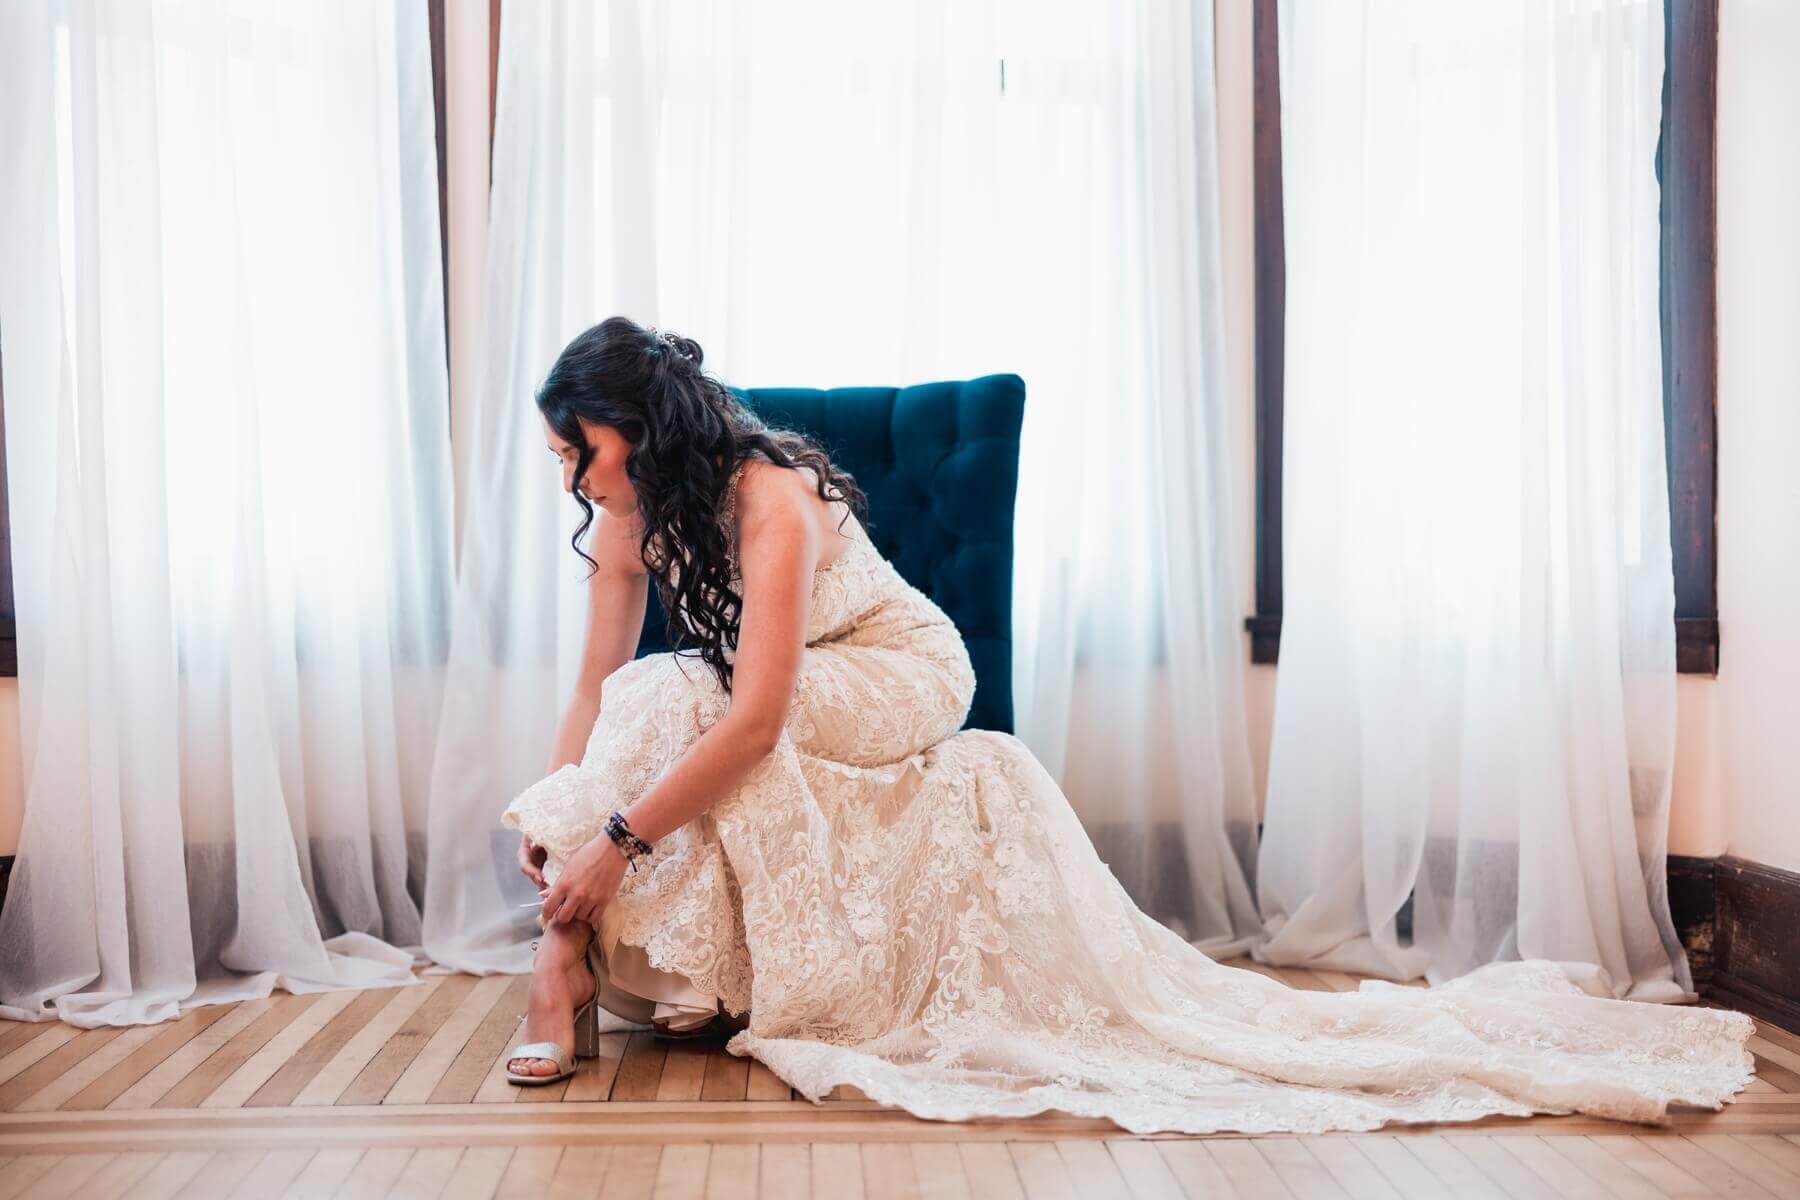 Bride putting on shoe at wedding venue in Illinois